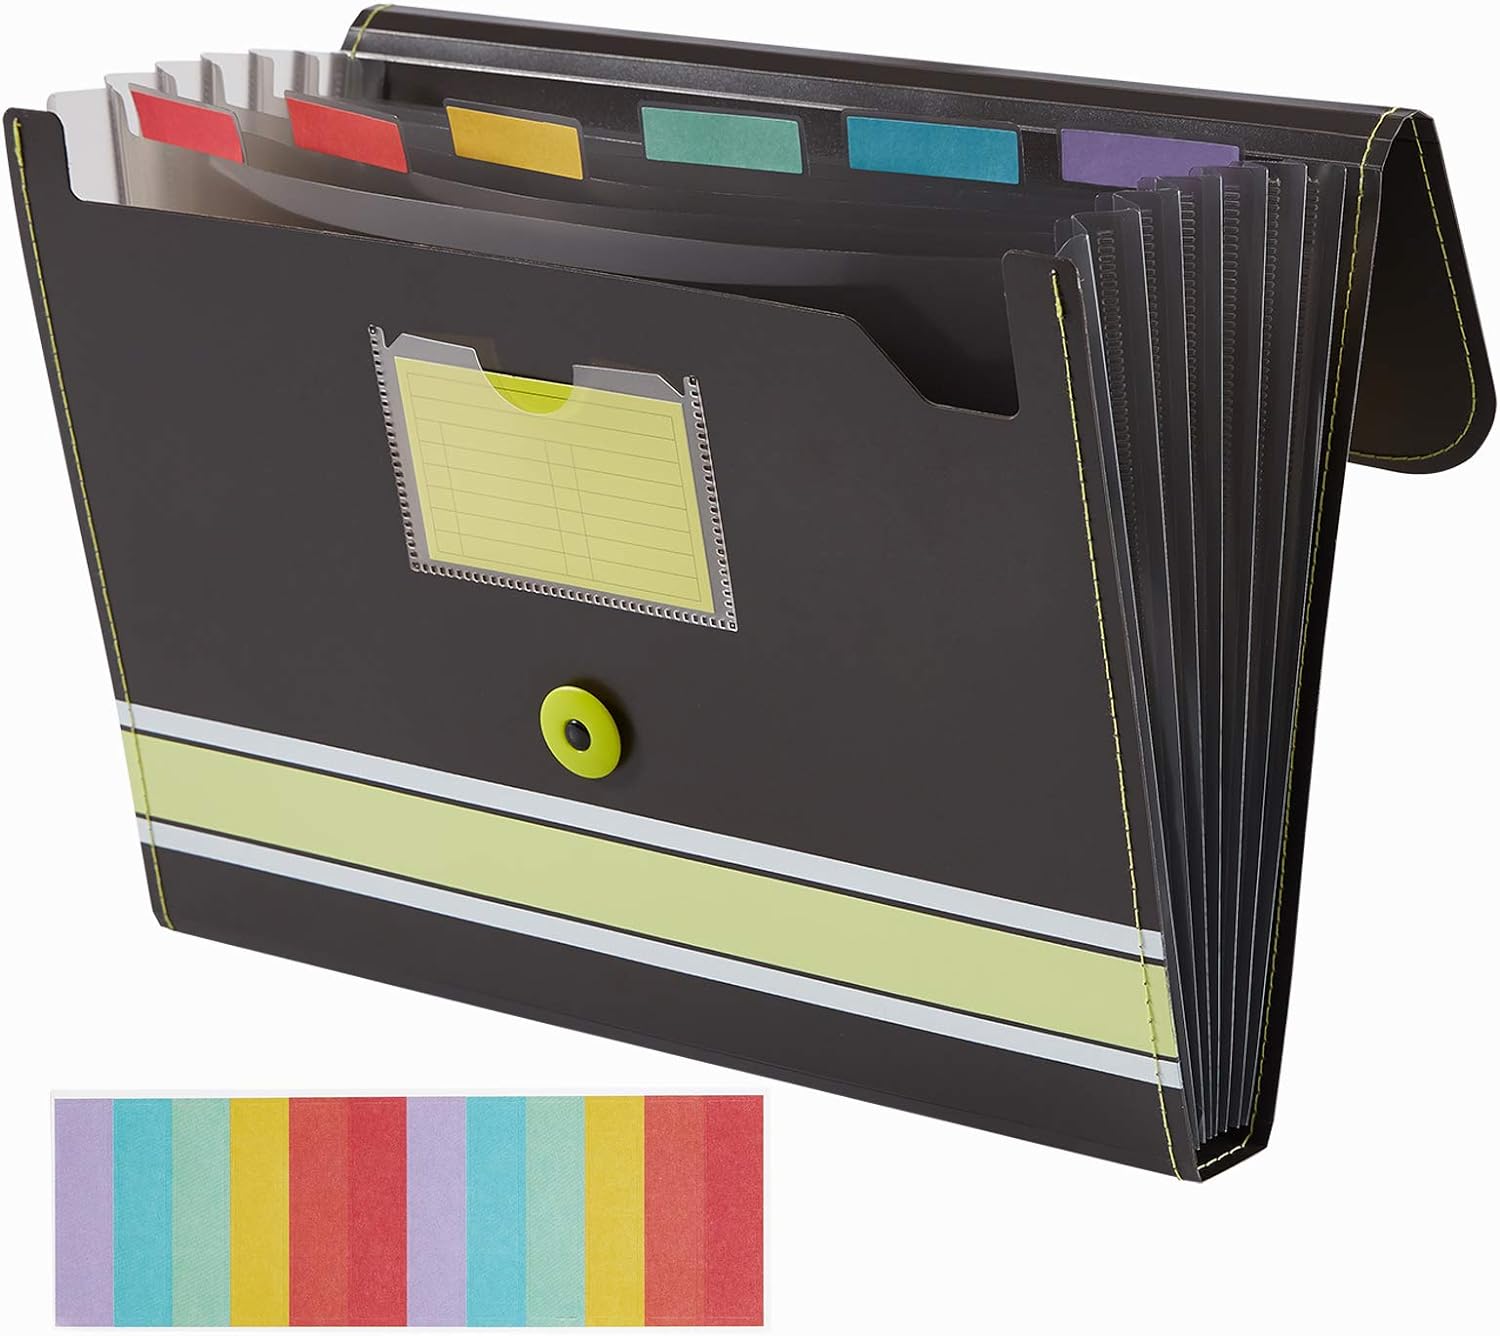 Sooez Expanding File Folder Organizer with Sticky Labels, Lime Green, 13.9 x 9.4 x 1.2